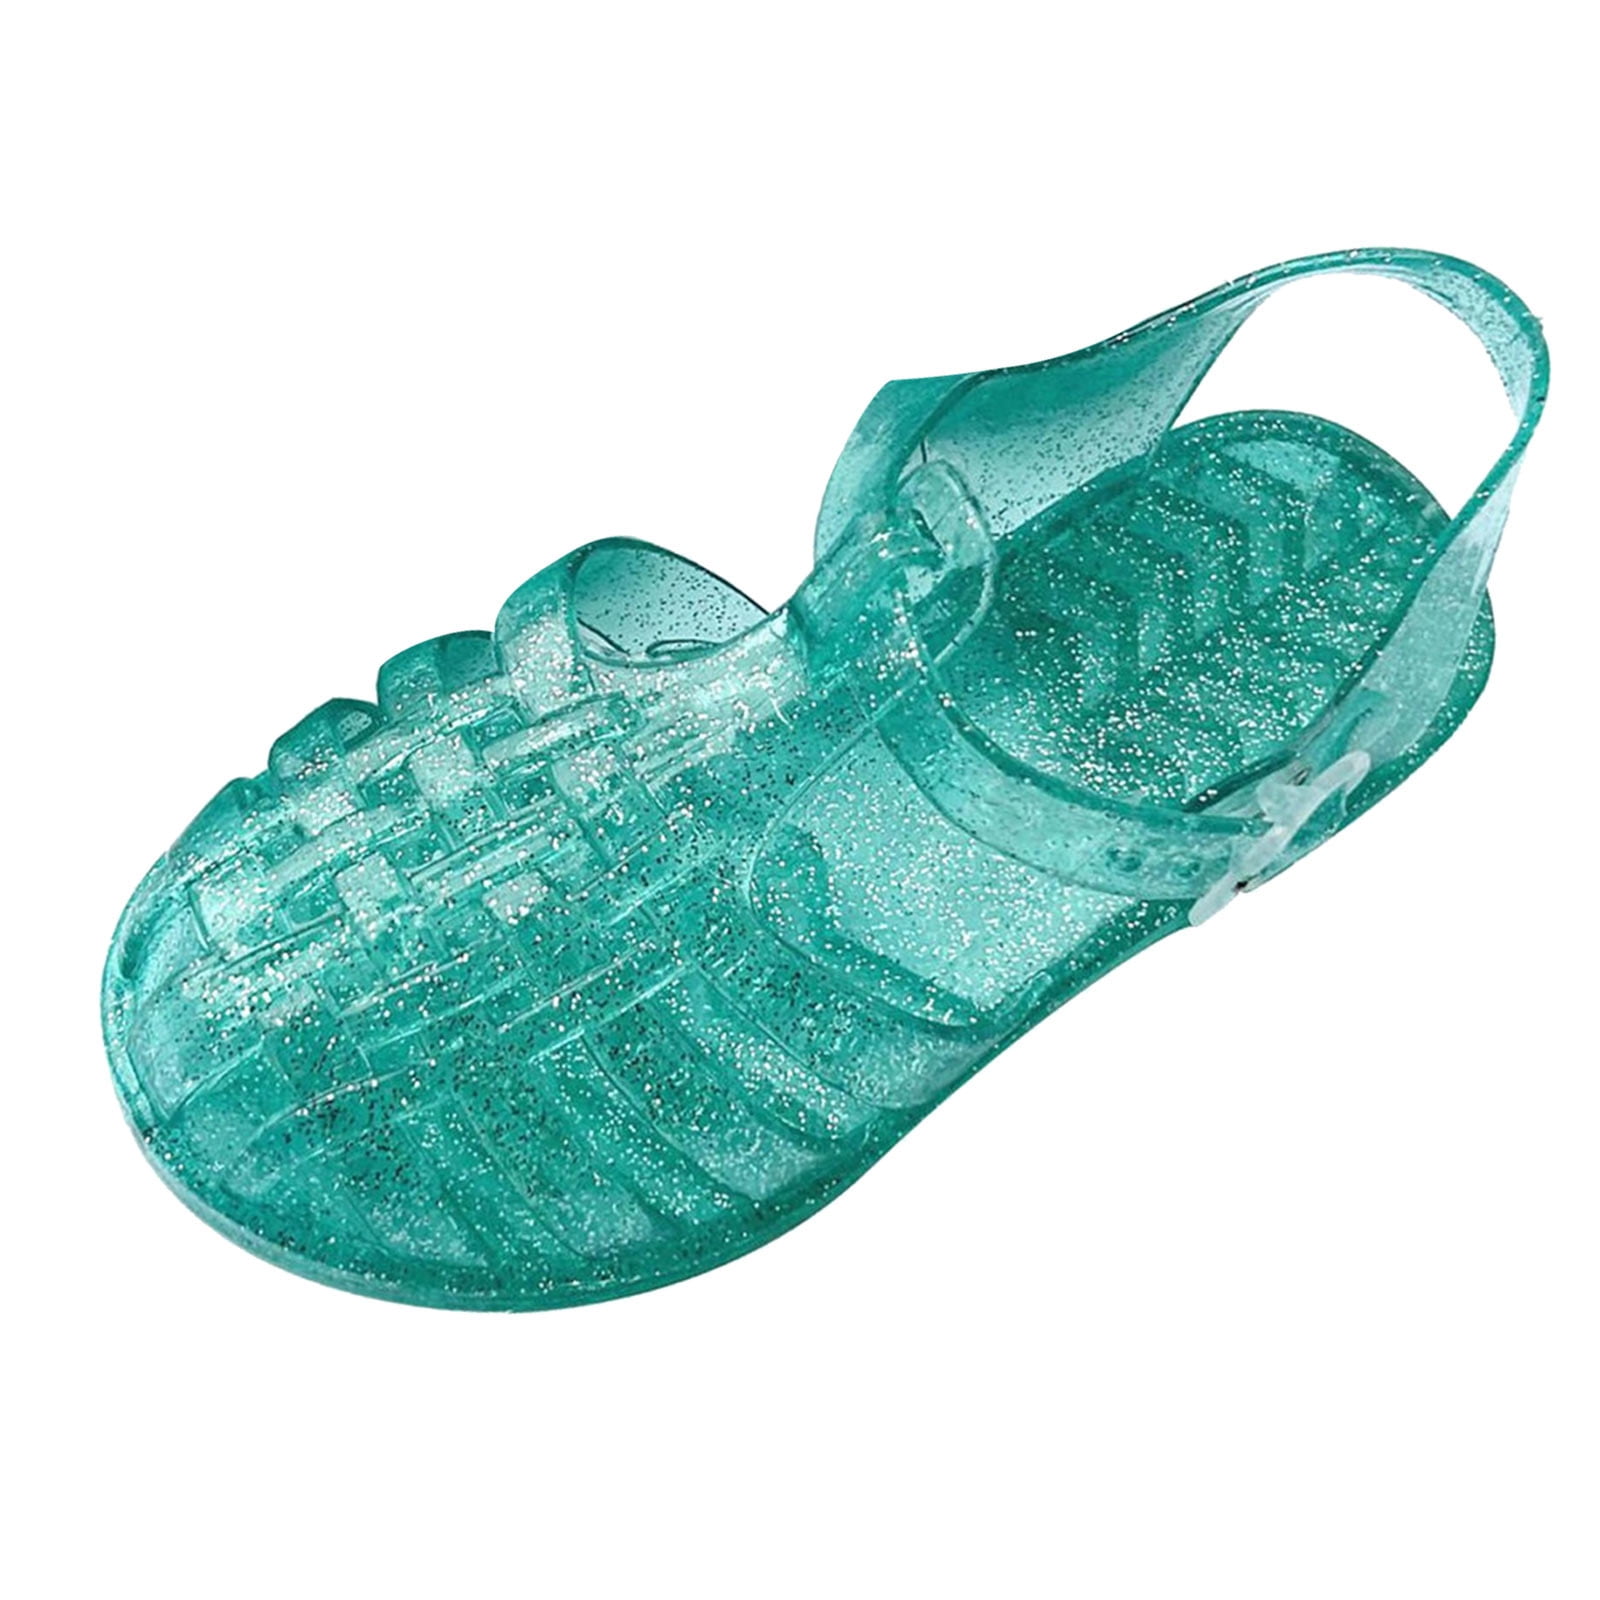 Lovskoo Little Girls Jelly Sandal for 7-8 Years Old Hollow Out Non-slip  Cute Fruit Soft Sole Beach Roman Sandals Green 